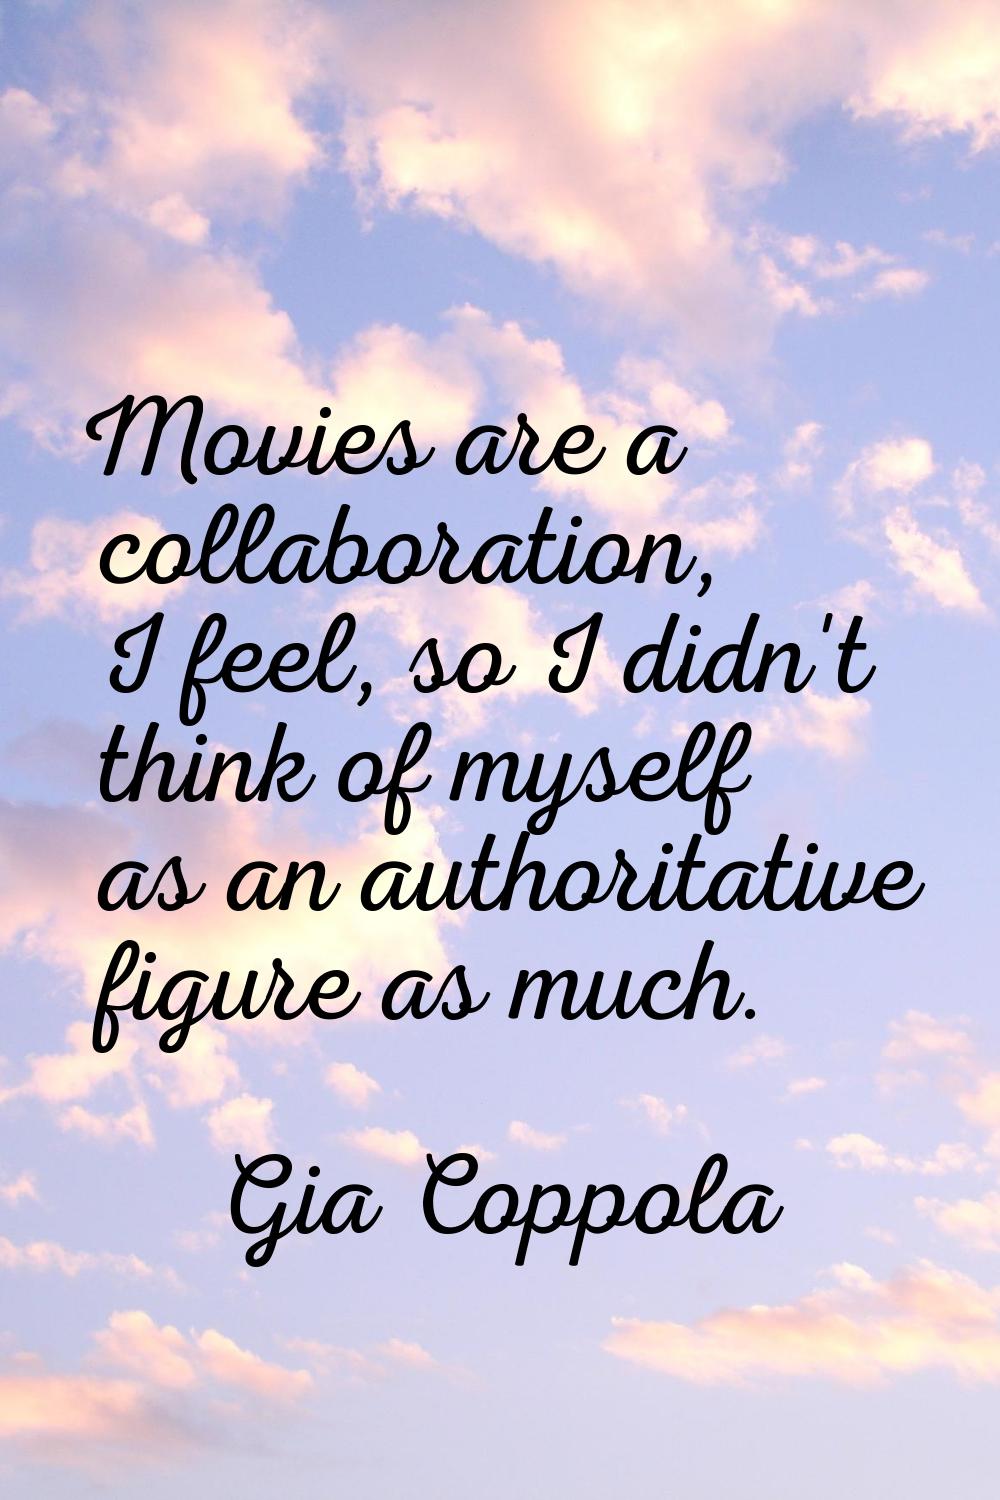 Movies are a collaboration, I feel, so I didn't think of myself as an authoritative figure as much.